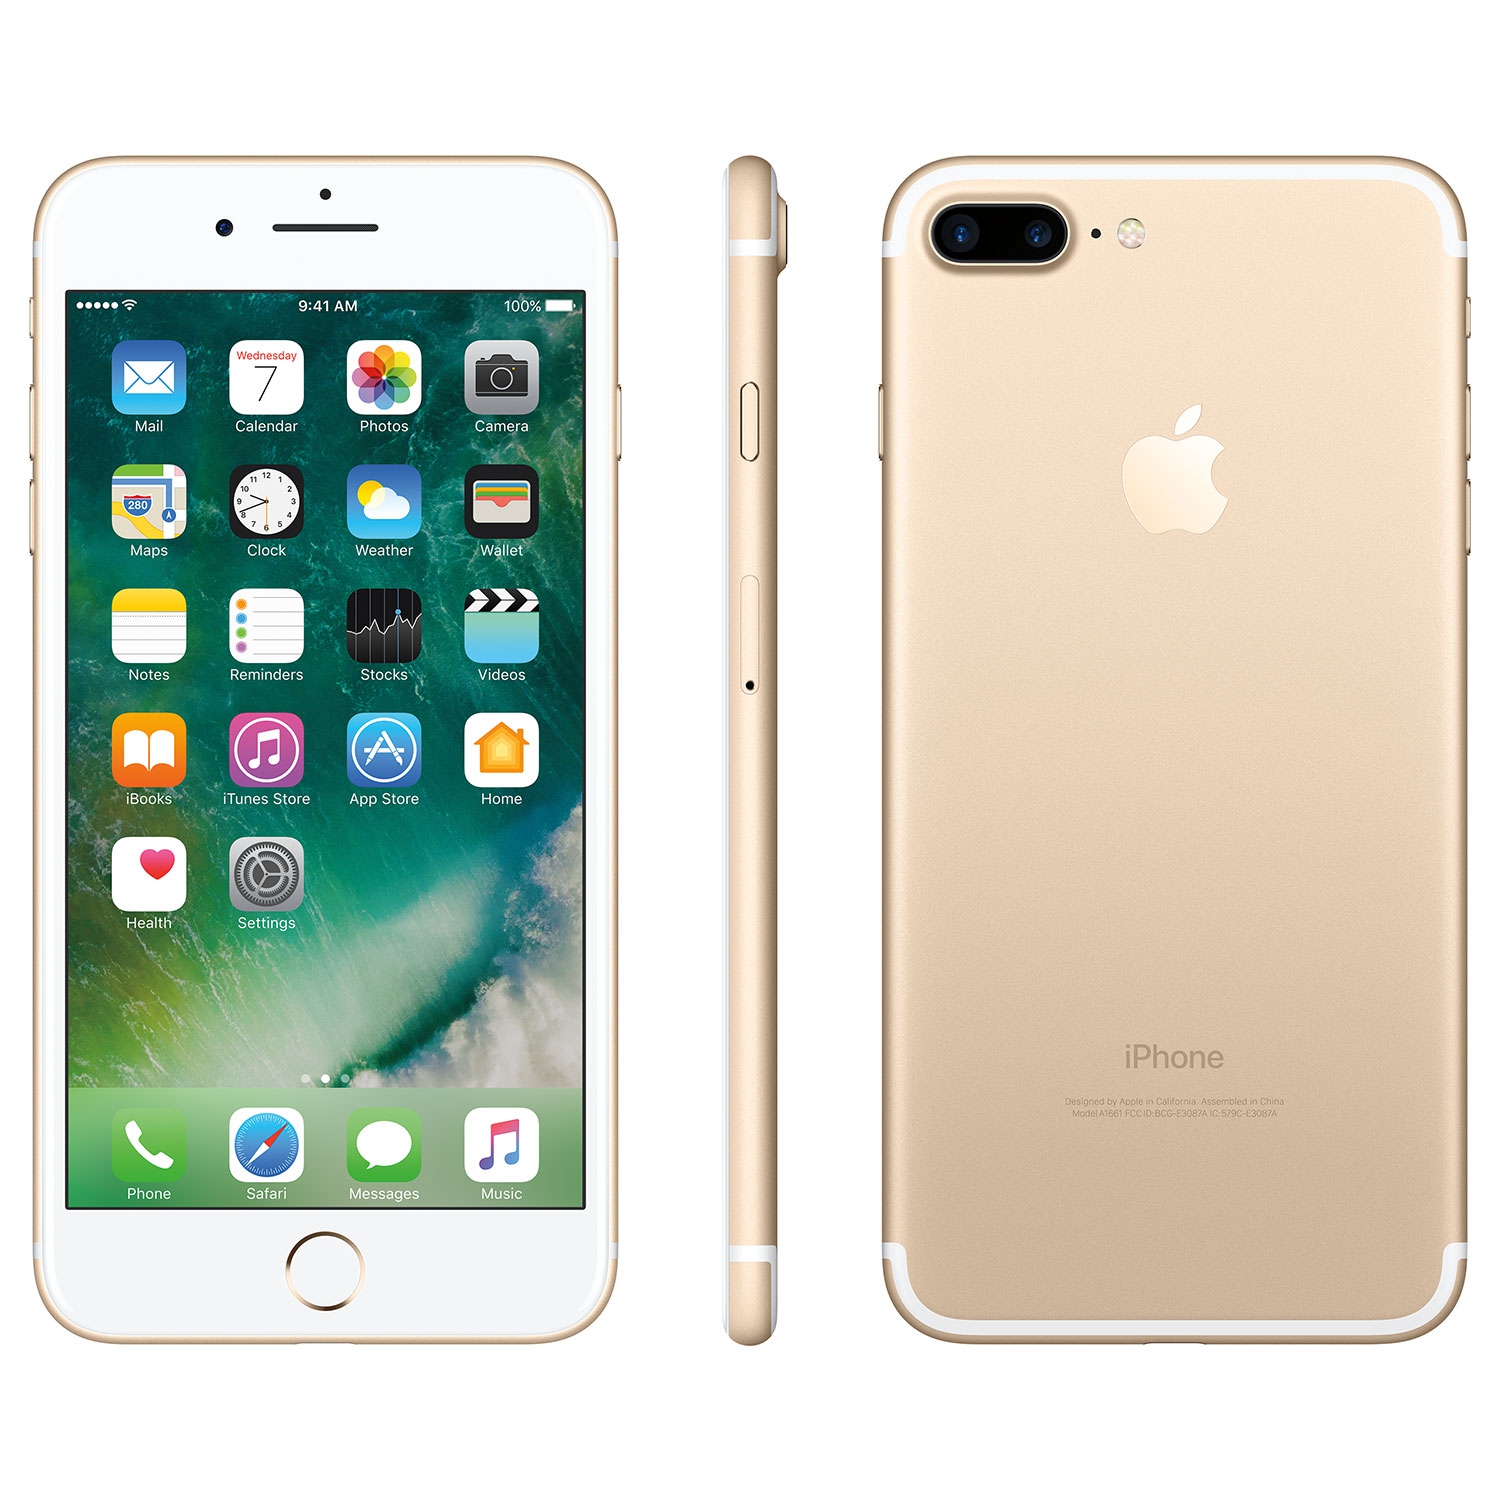 Apple iPhone 7 Plus 256GB Smartphone - Gold - Unlocked - Manufacturer Certified Pre-Owned